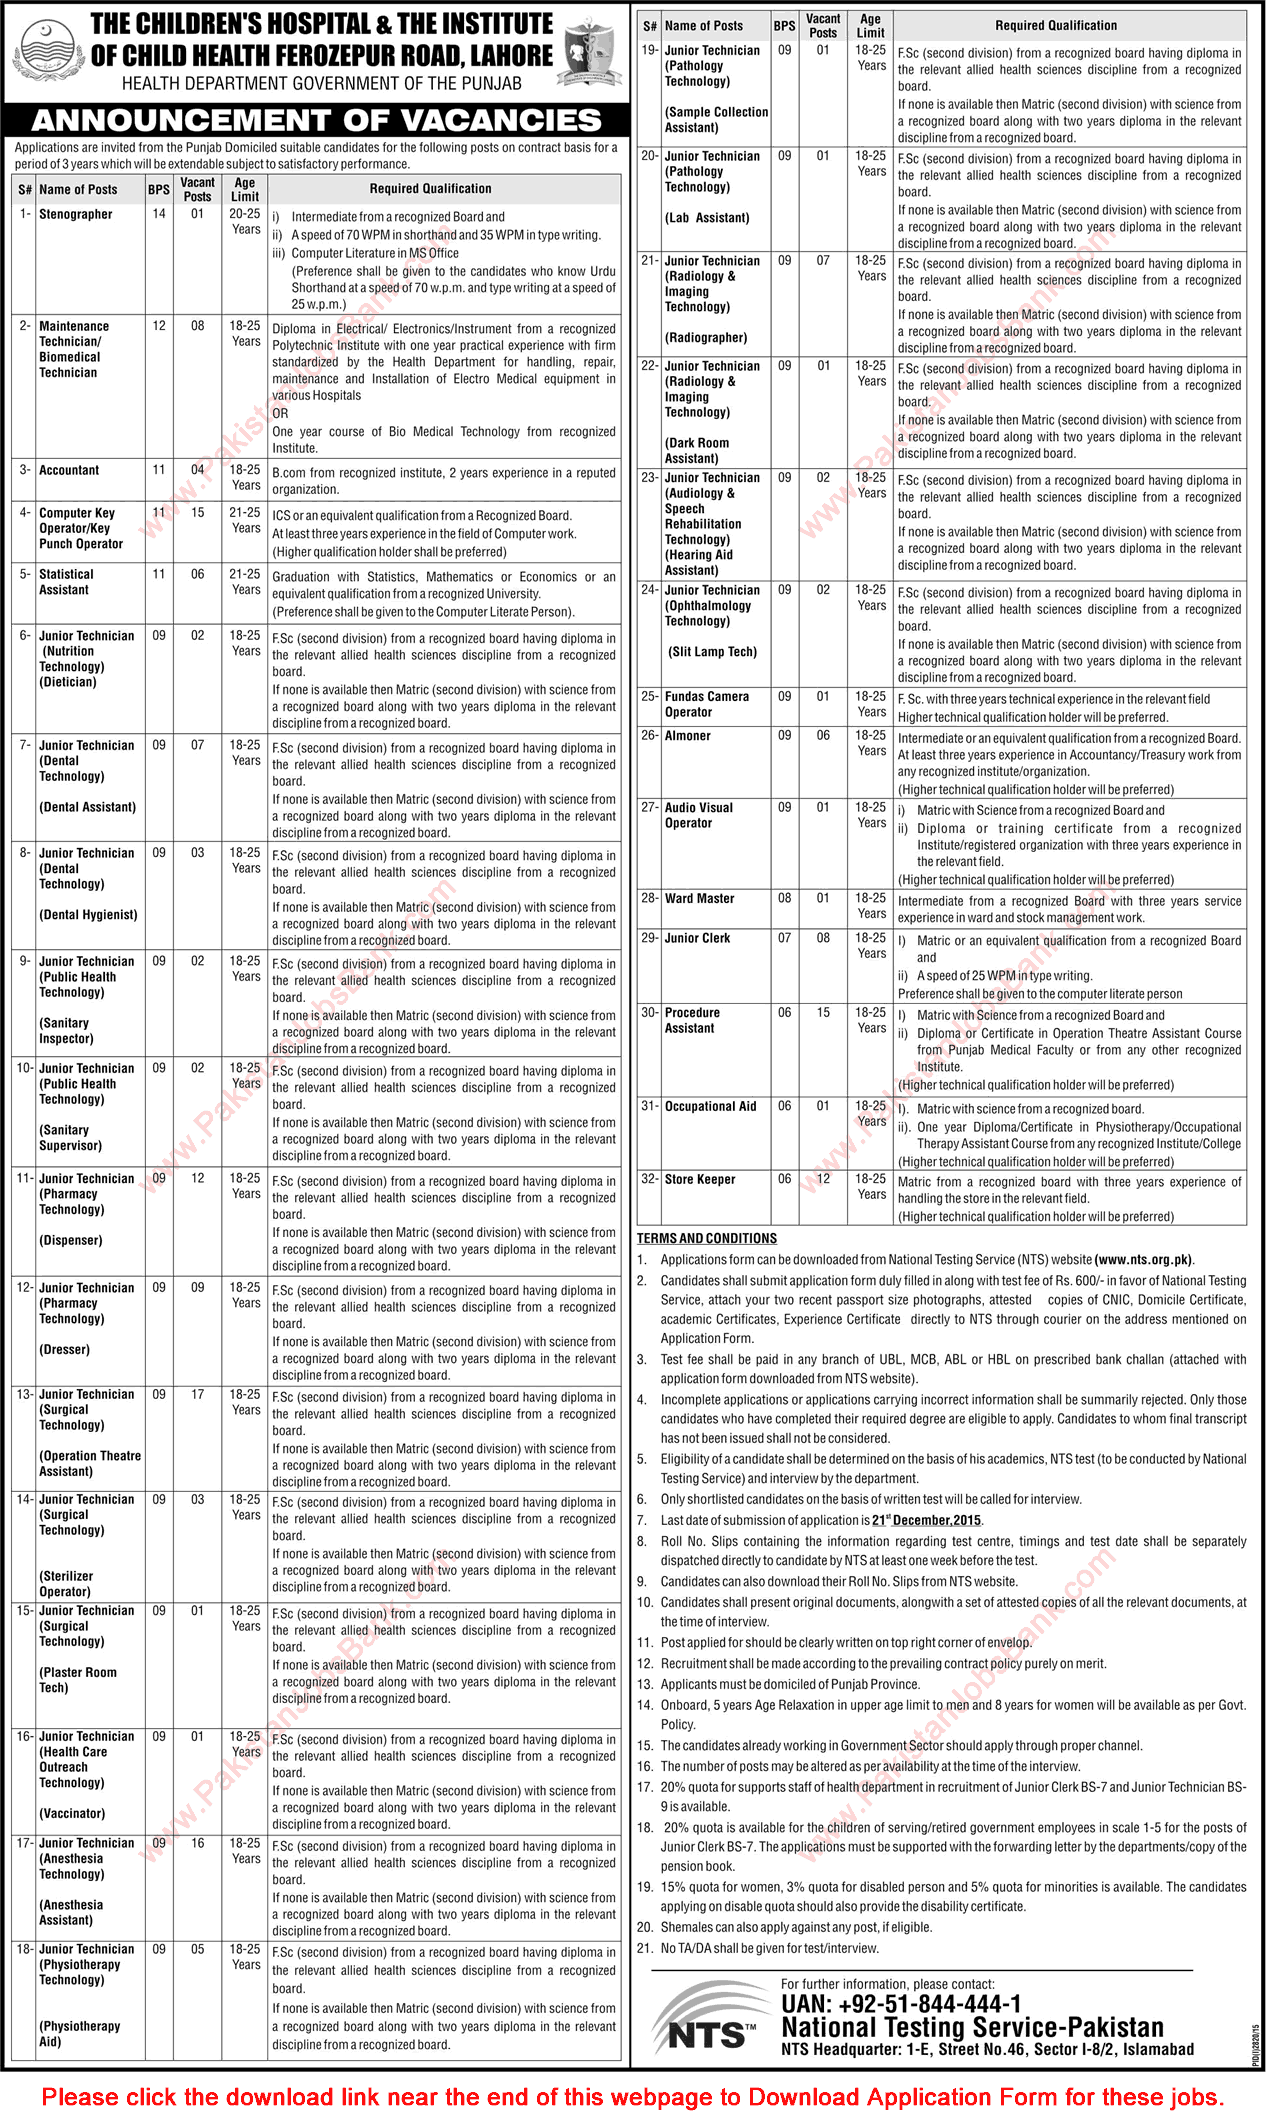 Children's Hospital Lahore Jobs 2015 December NTS Application Form The Institute of Child Health CHICH Latest